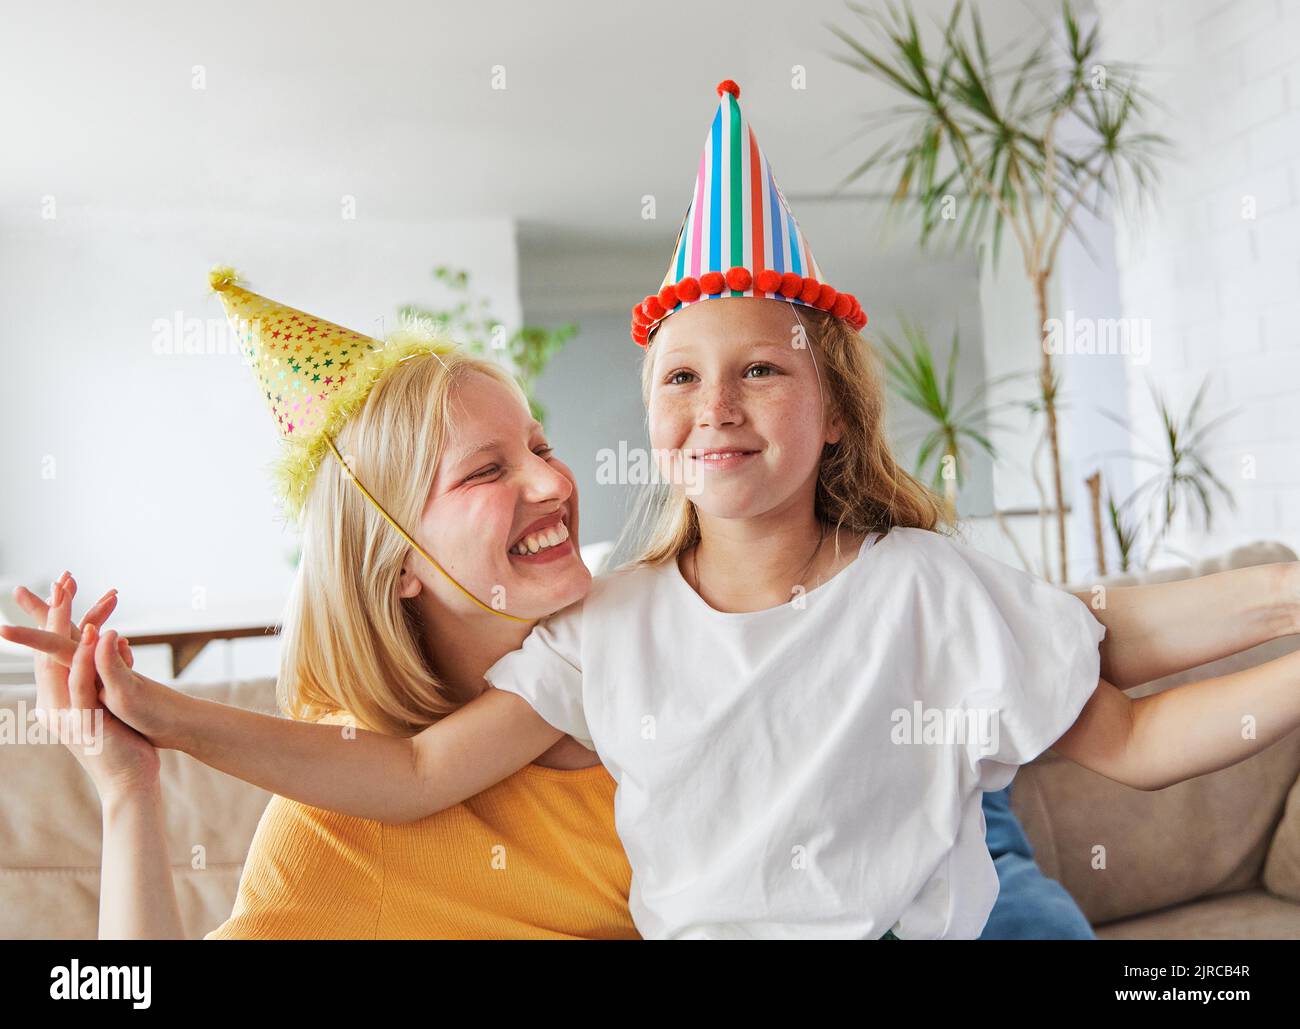 child sister fun family girl together childhood female happy daughter young lifestyle birthday party hat happiness kid togetherness mother woman Stock Photo